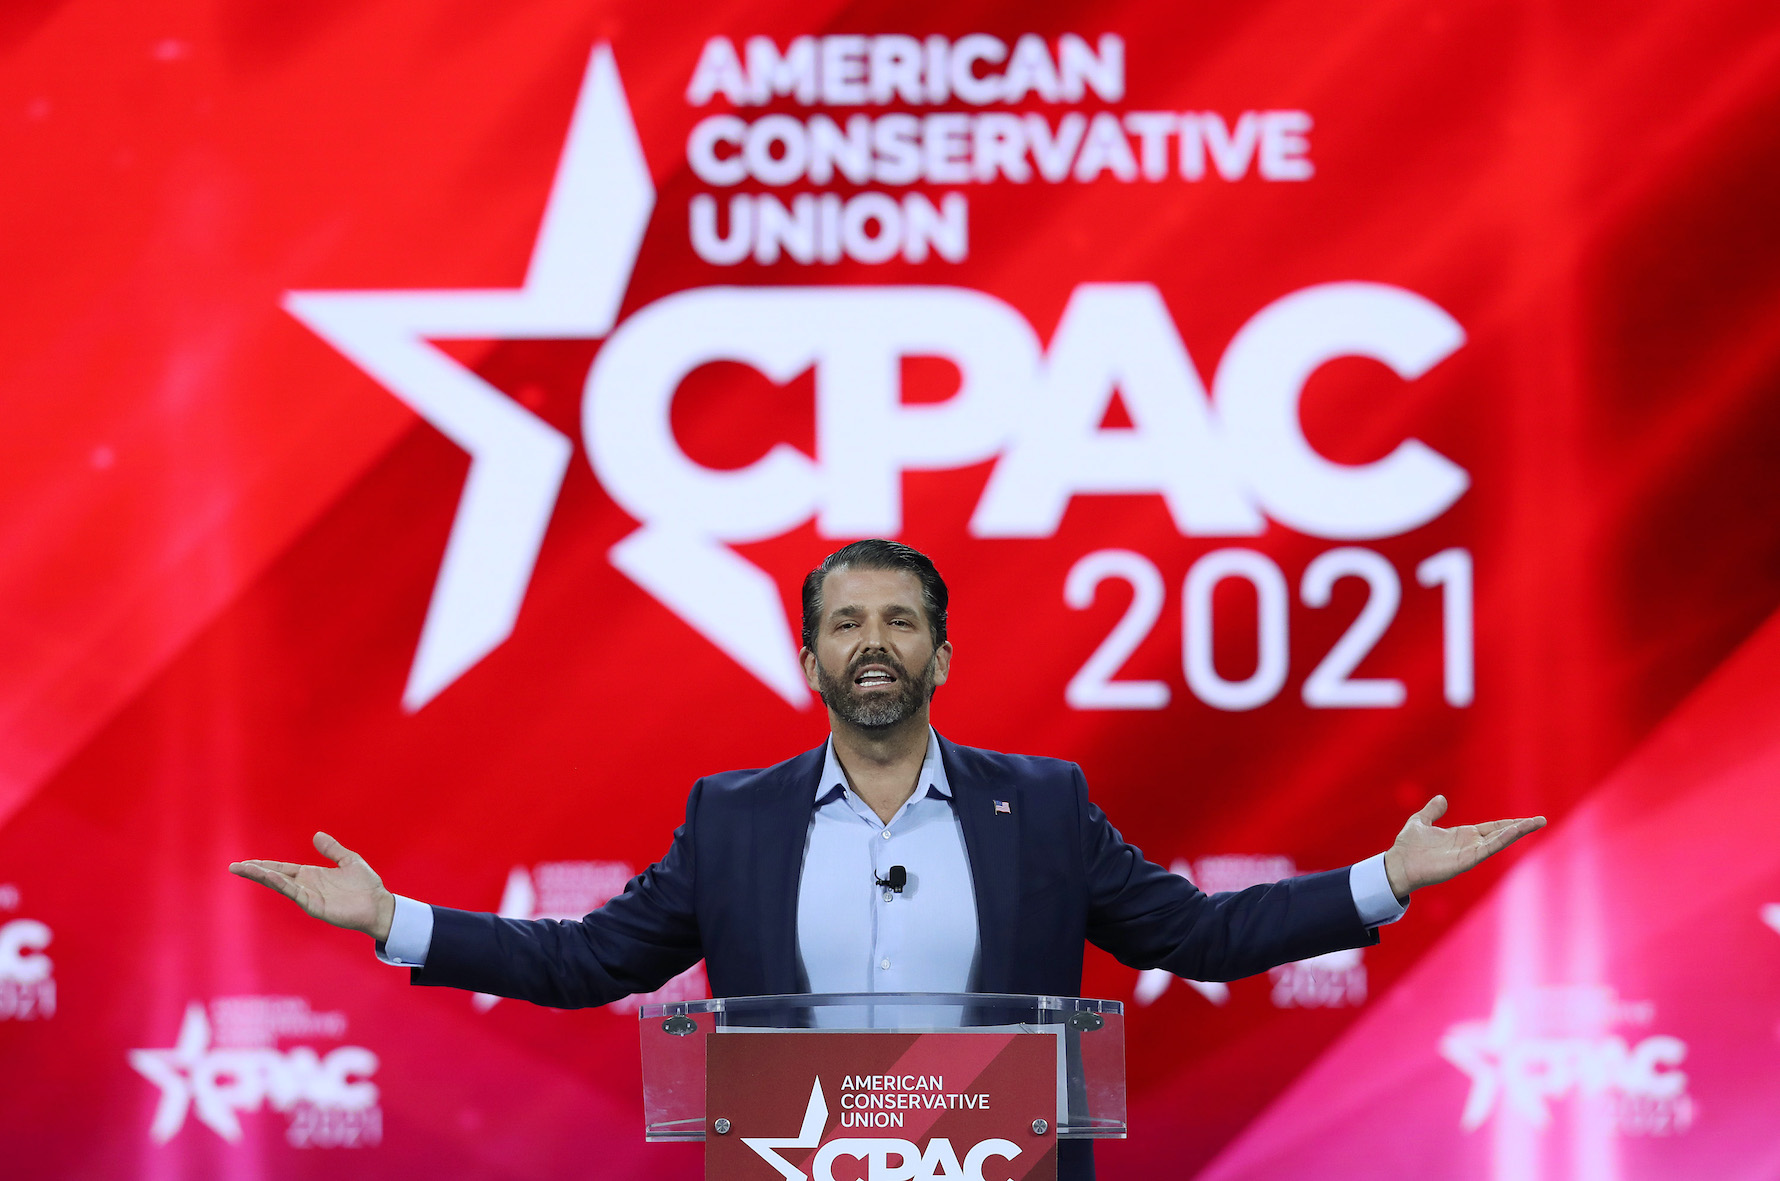 Donald Trump Jr. Speaks at CPAC: Reigniting the Spirit of the American Dream